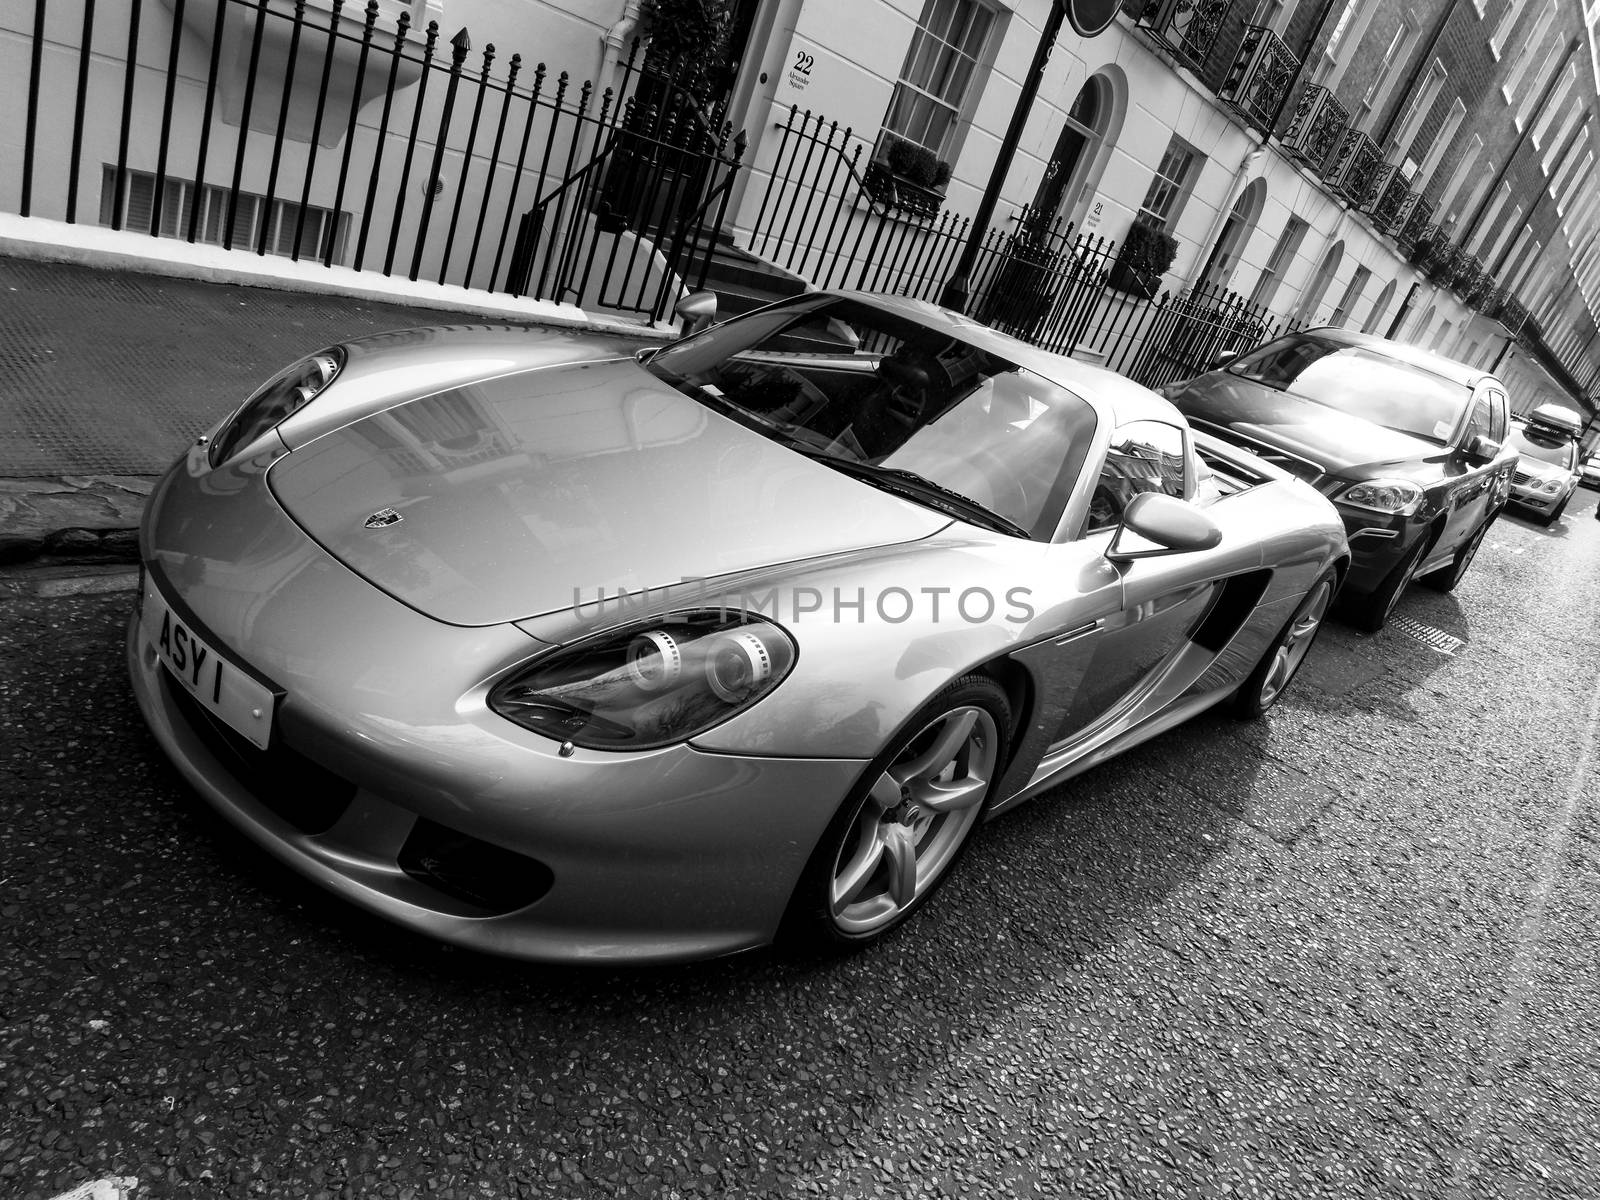 Porsche Carrera GT in London, black and white photography by dutourdumonde